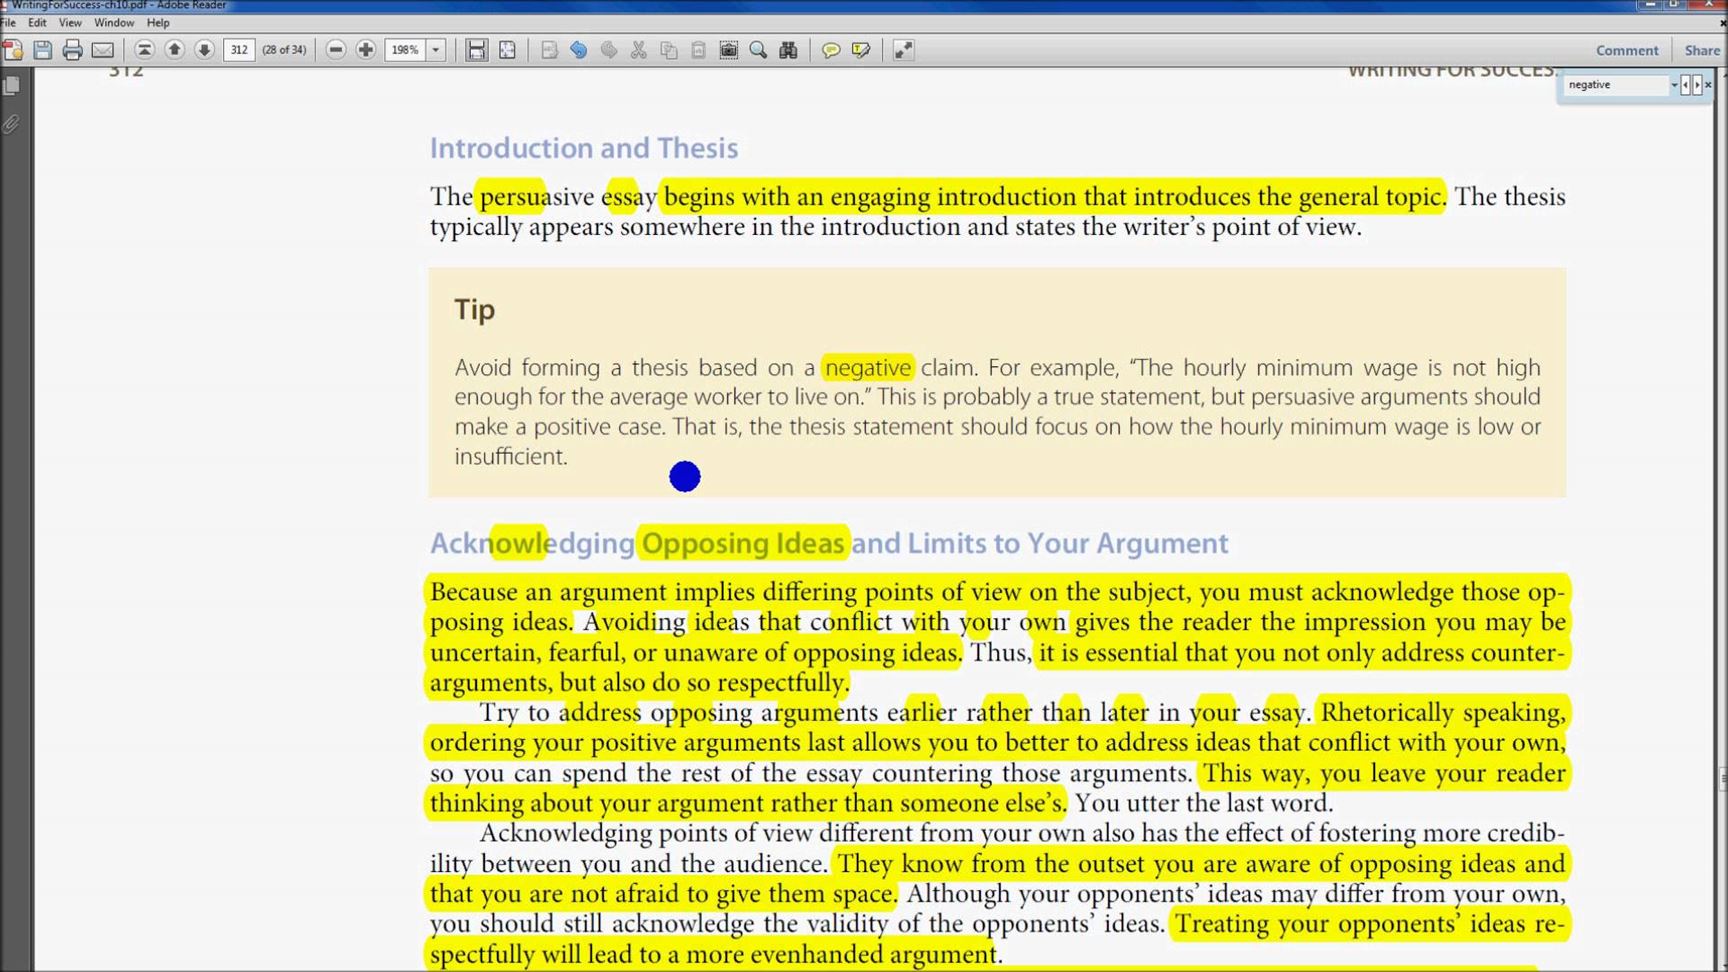 5 Easy Ways To Highlight Text In Pdf On Mac